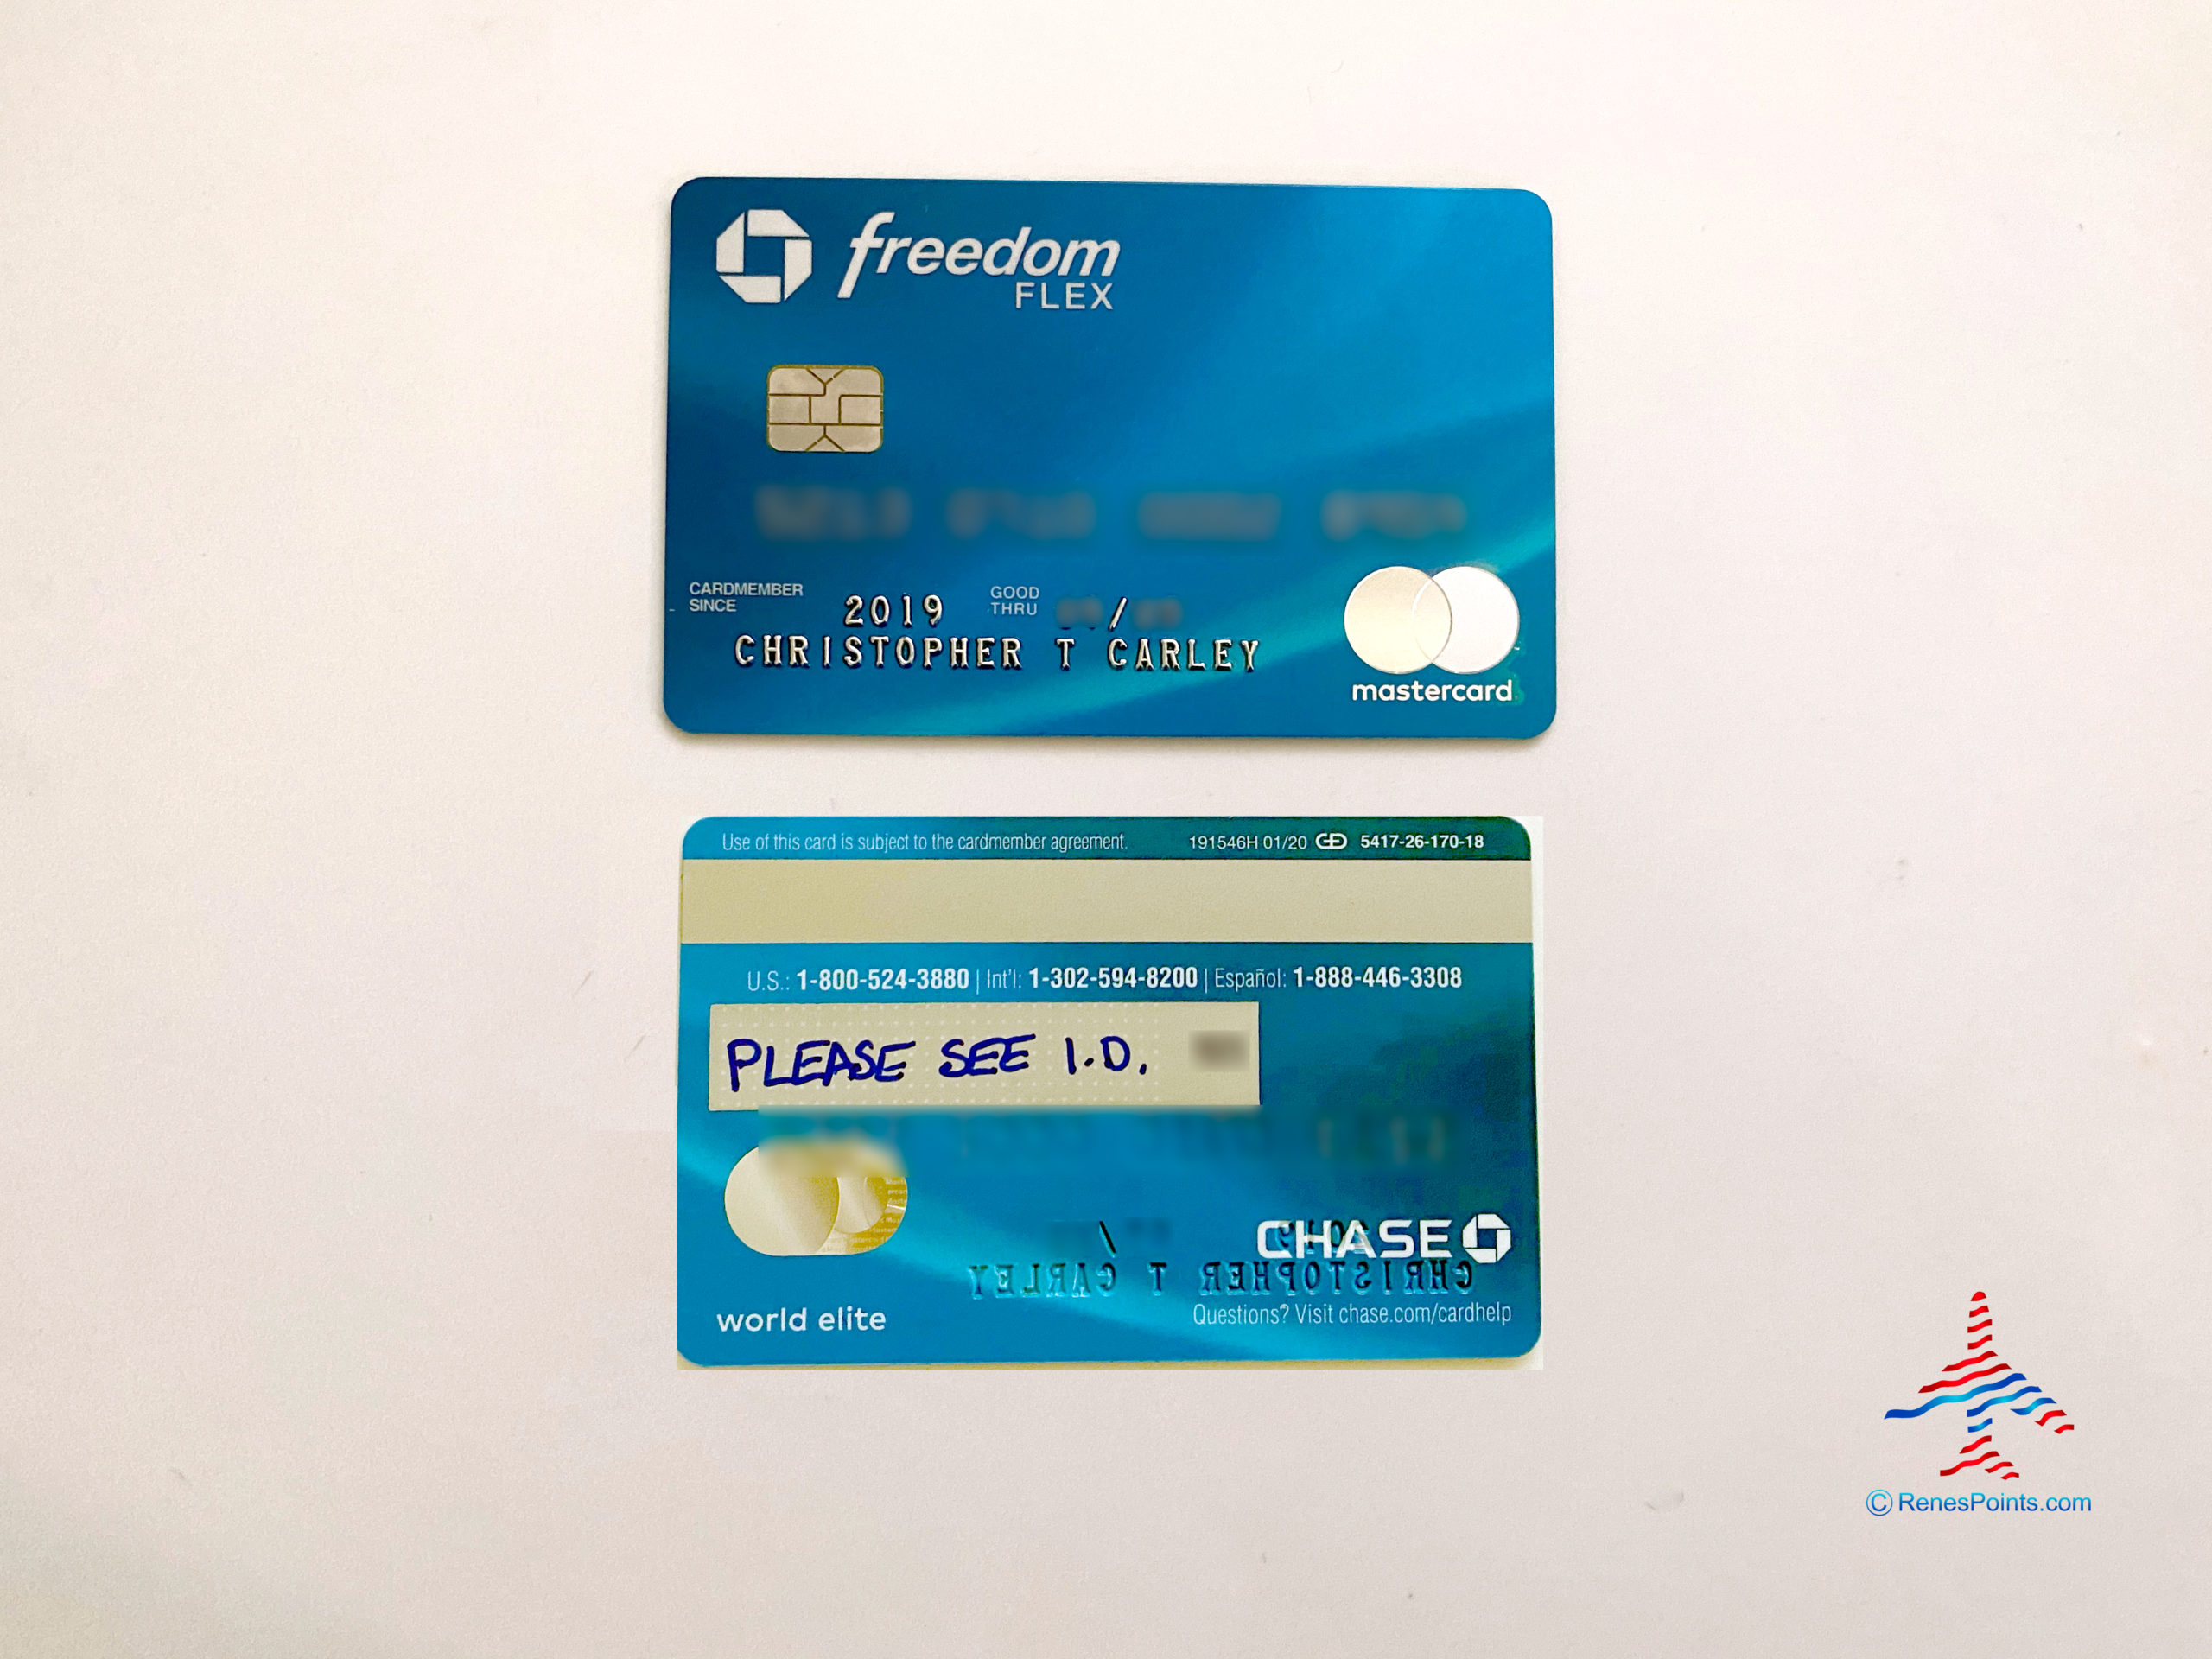 chase freedom card